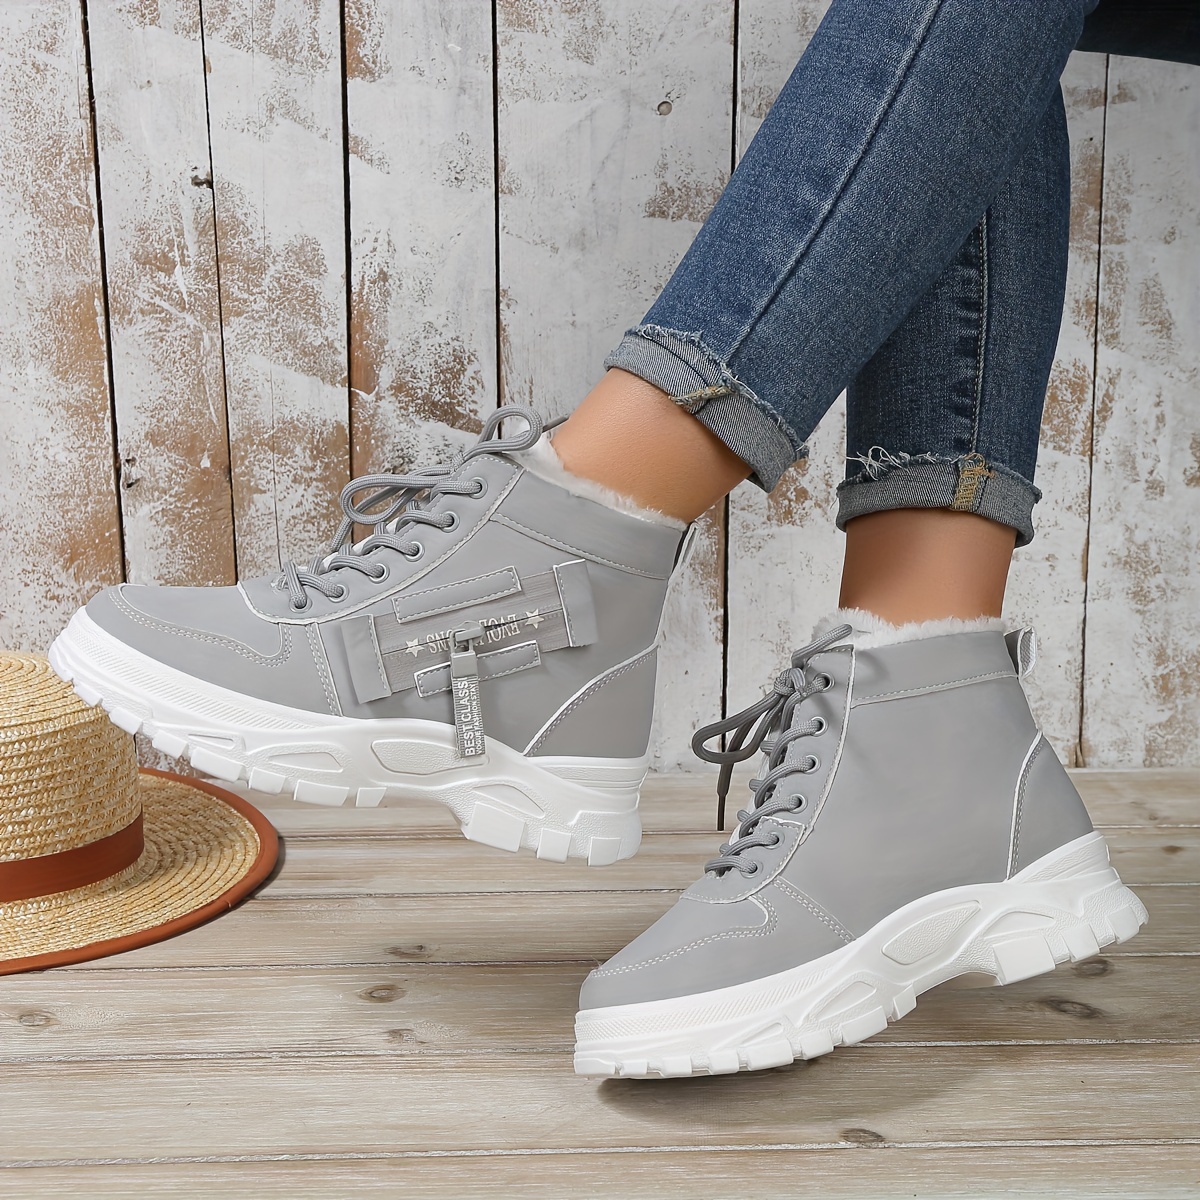 womens winter high top sneakers casual lace up plush lined boots comfortable side zipper short boots details 6